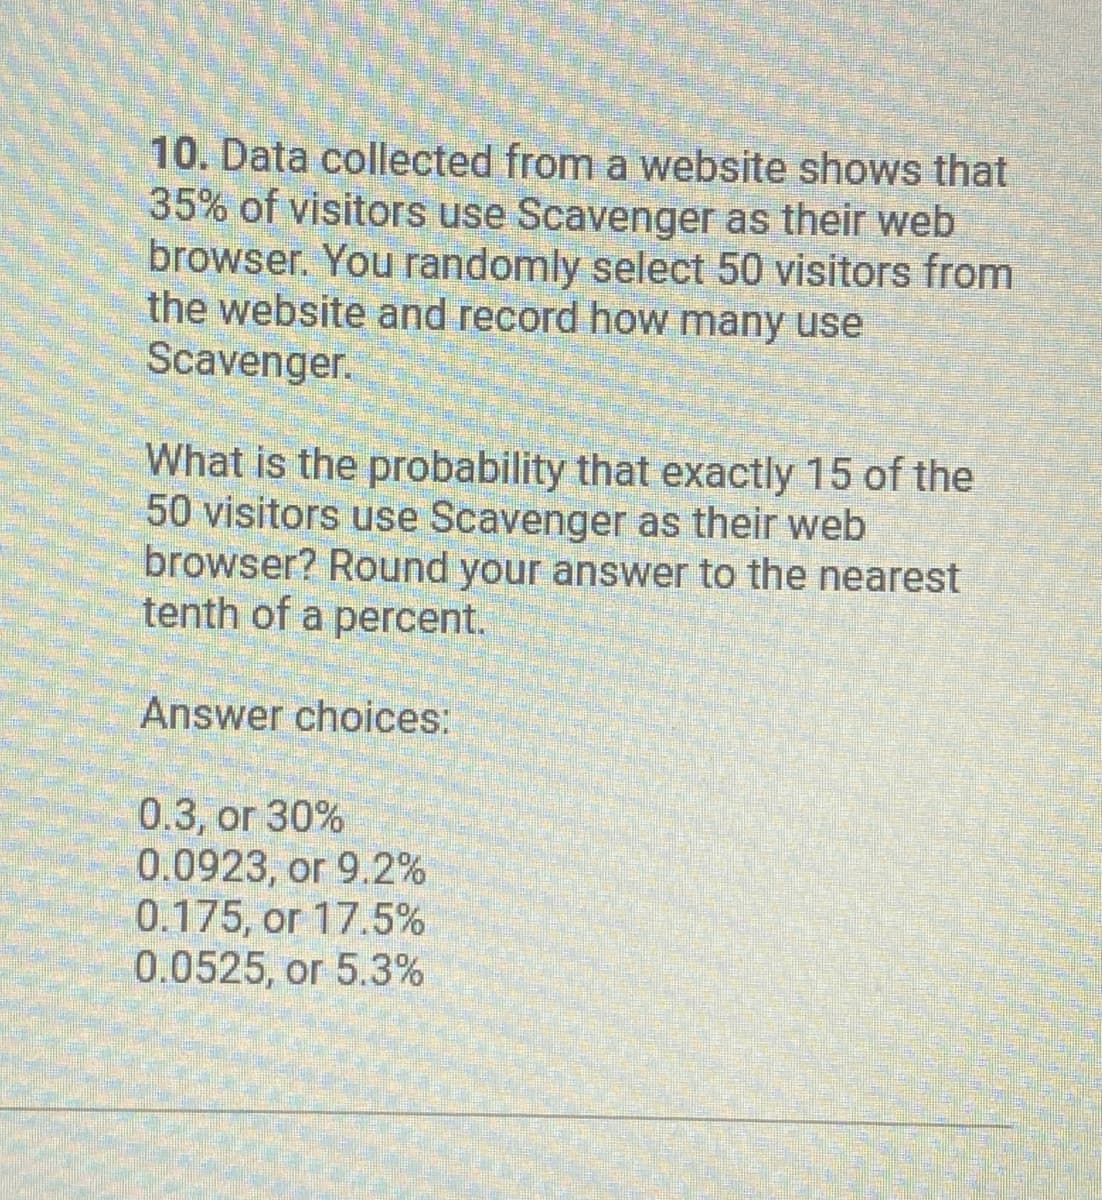 10. Data collected from a website shows that
35% of visitors use Scavenger as their web
browser. You randomly select 50 visitors from
the website and record how many use
Scavenger.
What is the probability that exactly 15 of the
50 visitors use Scavenger as their web
browser? Round your answer to the nearest
tenth of a percent.
Answer choices:
0.3, or 30%
0.0923, or 9.2%
0.175, or 17.5%
0.0525, or 5.3%